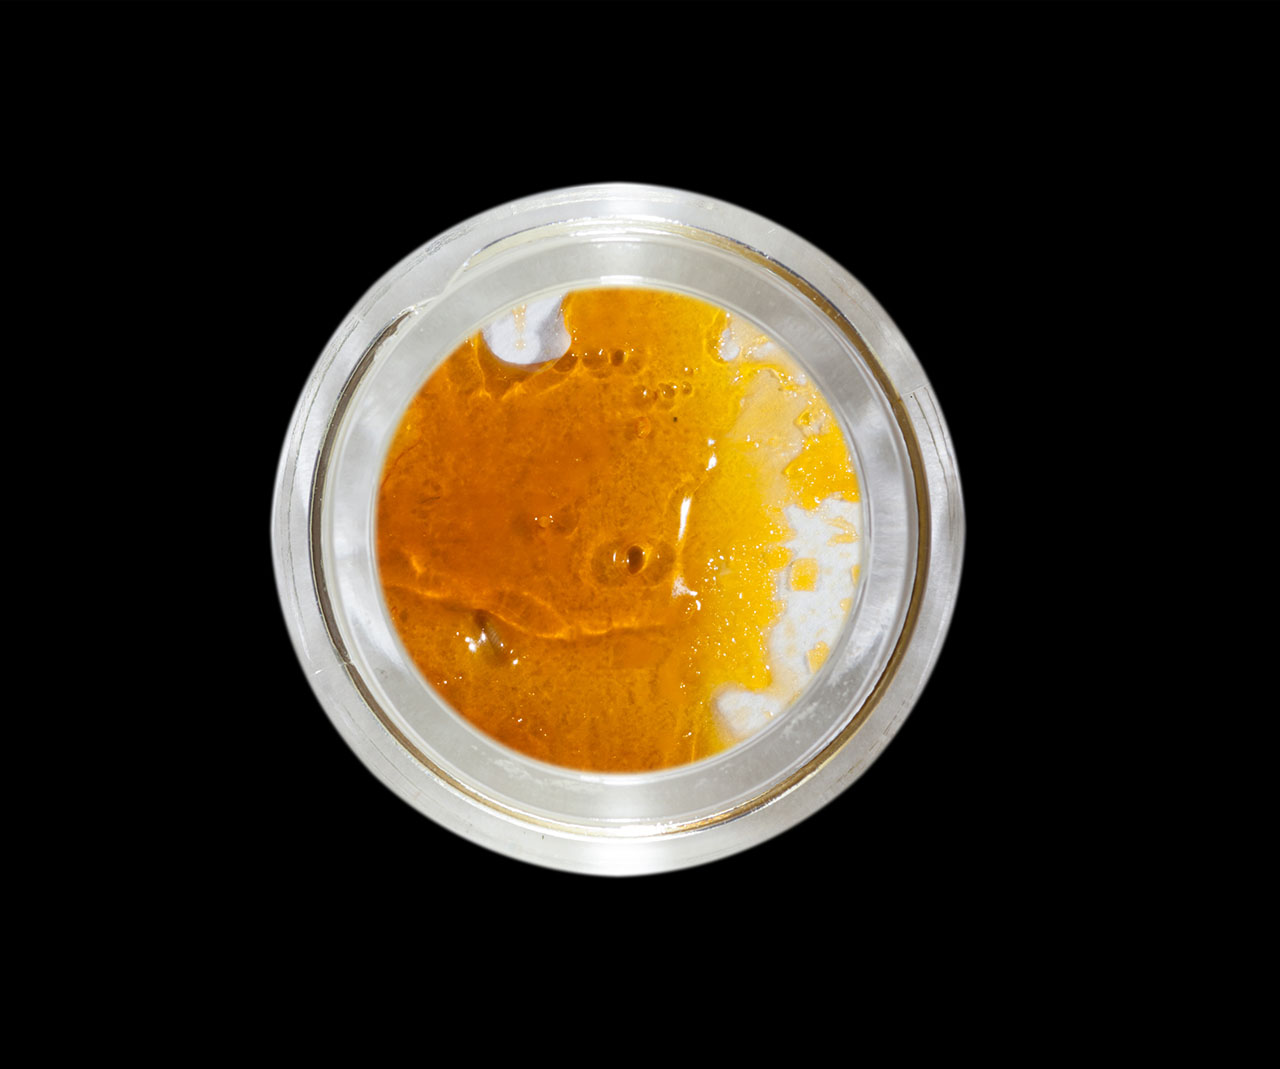 2016 NorCal Medical Cannabis Cup, hybrid concentrates